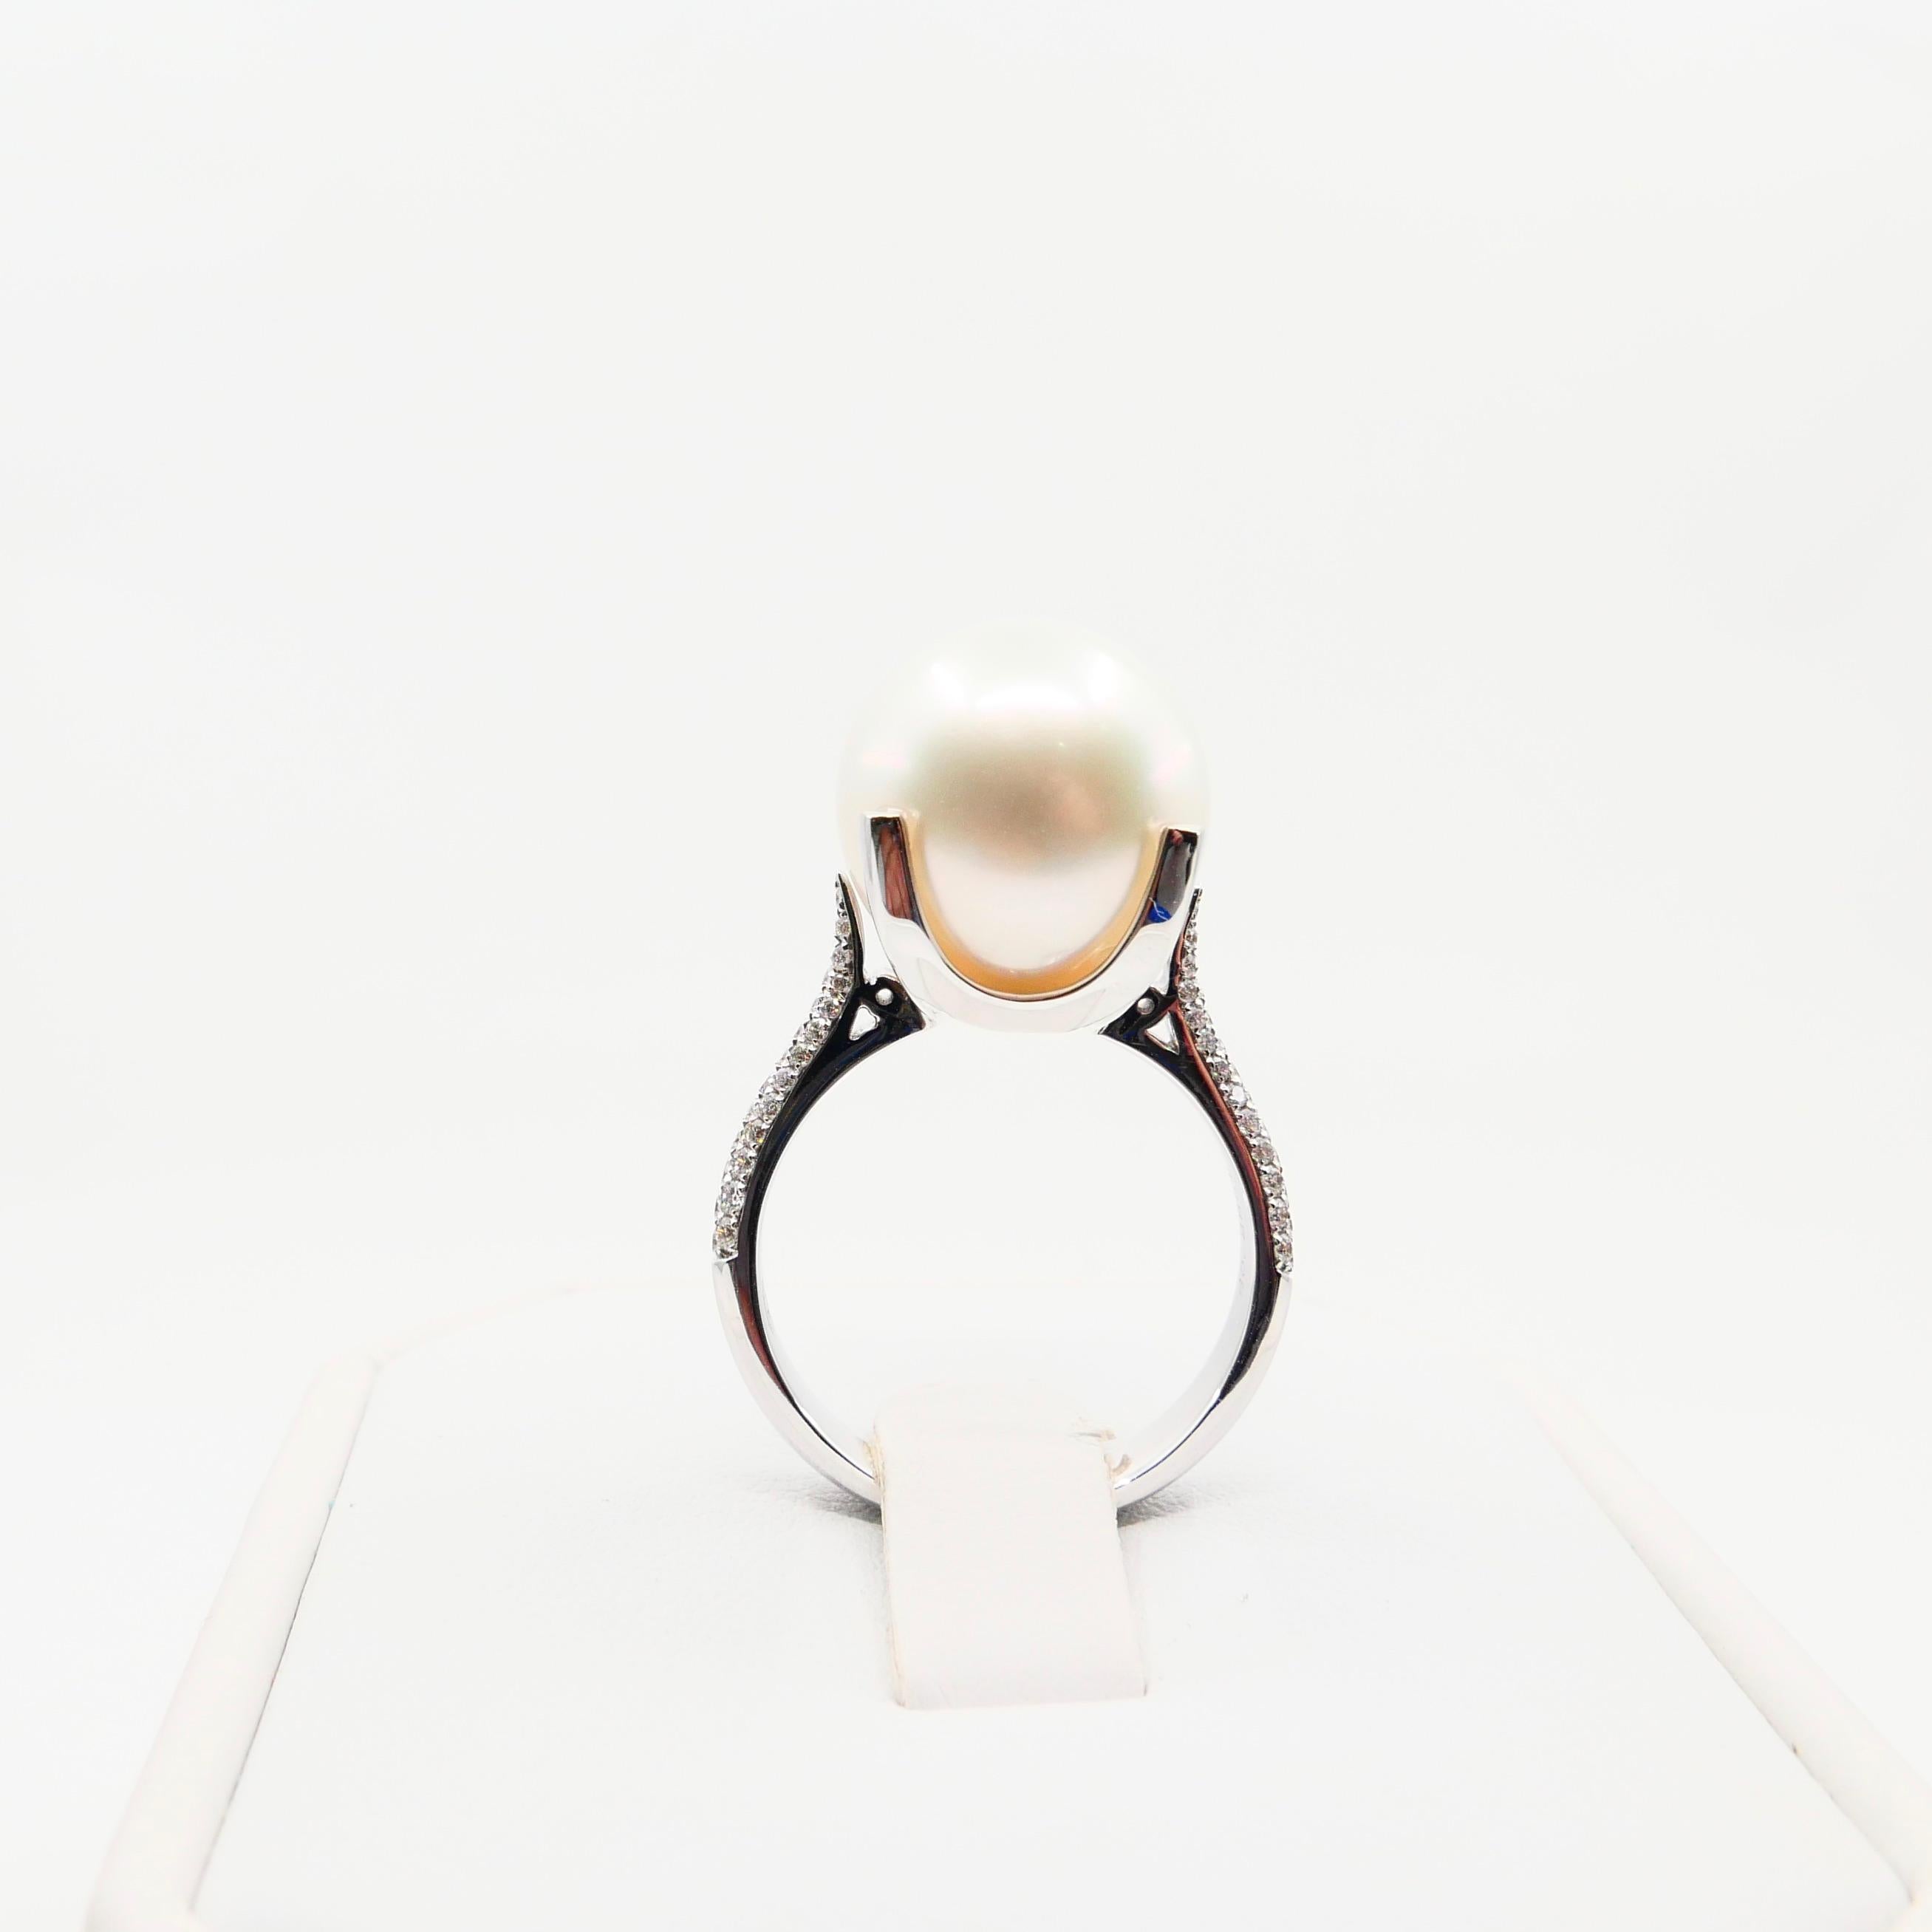 Certified South Sea Pearl and Diamond Ring, Our Signature Design 8